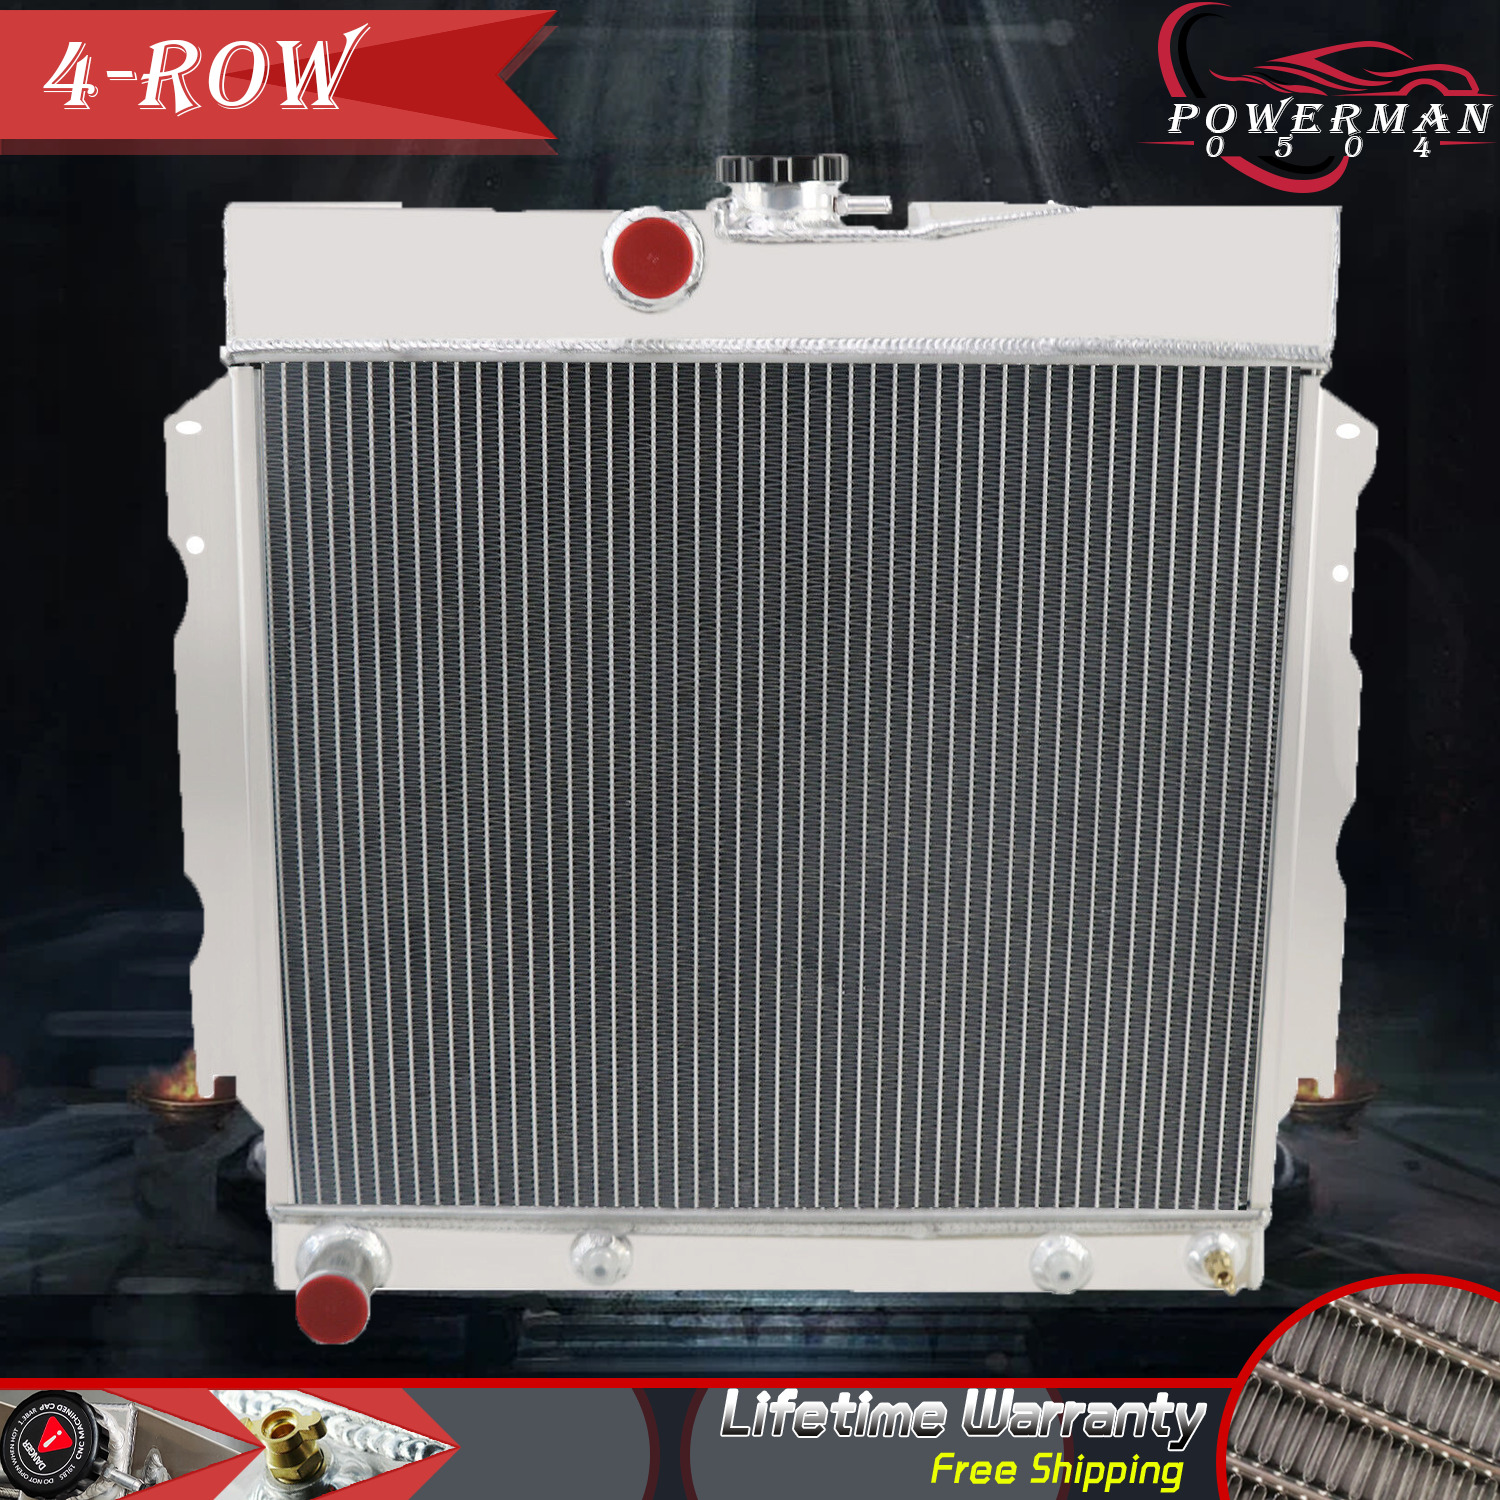 4-ROW RADIATOR FOR 1963-1969 DODGE DART/ CHARGER/ MOPAR CARS PLYMOUTH FURY 22\'\'W